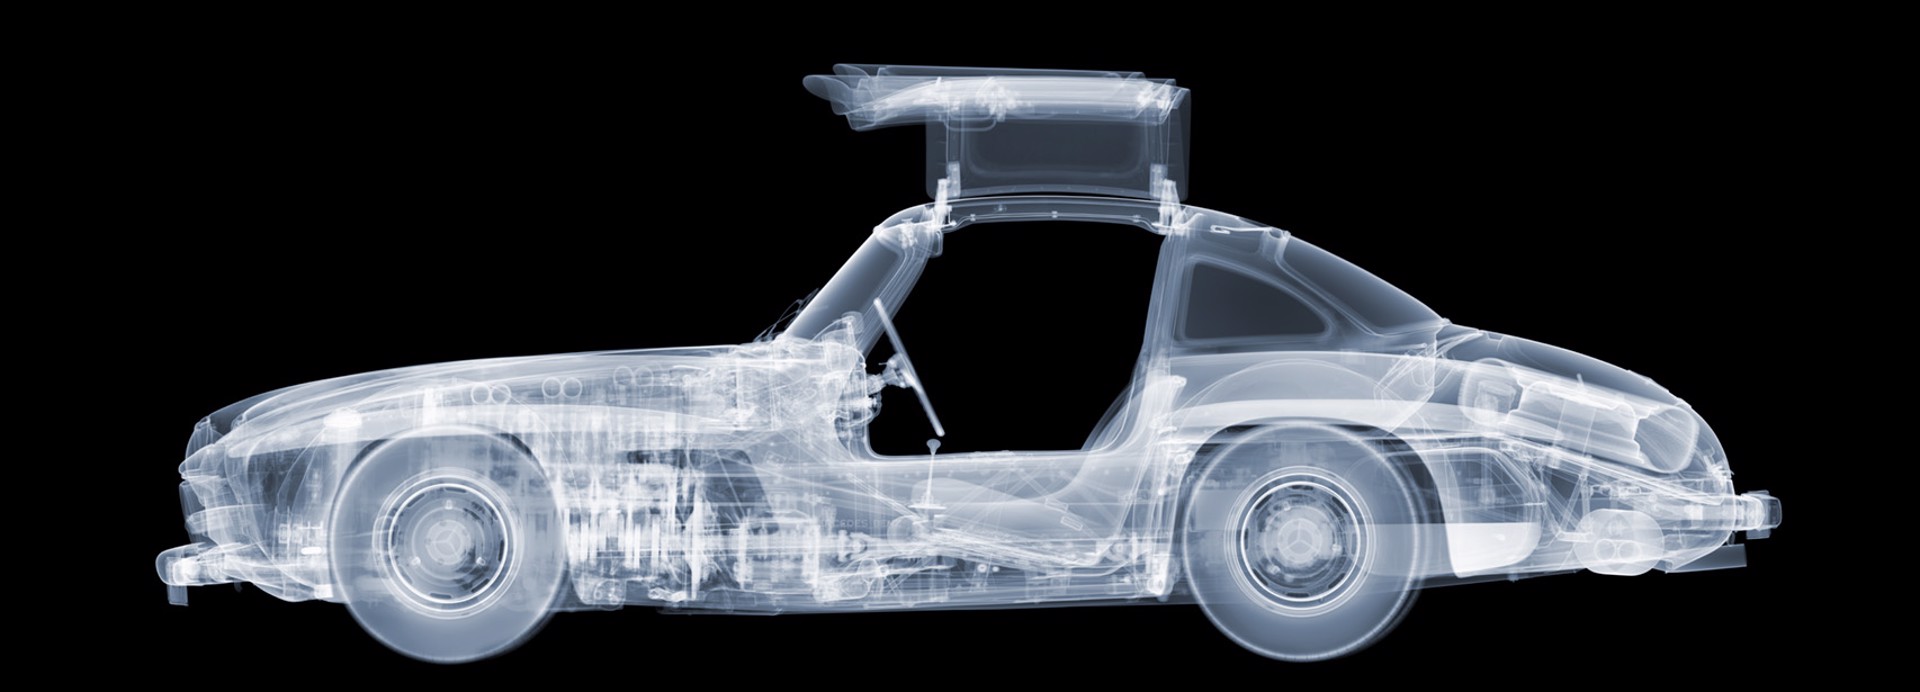 1955 Mercedes 300SL Gull-Wing by Nick Veasey